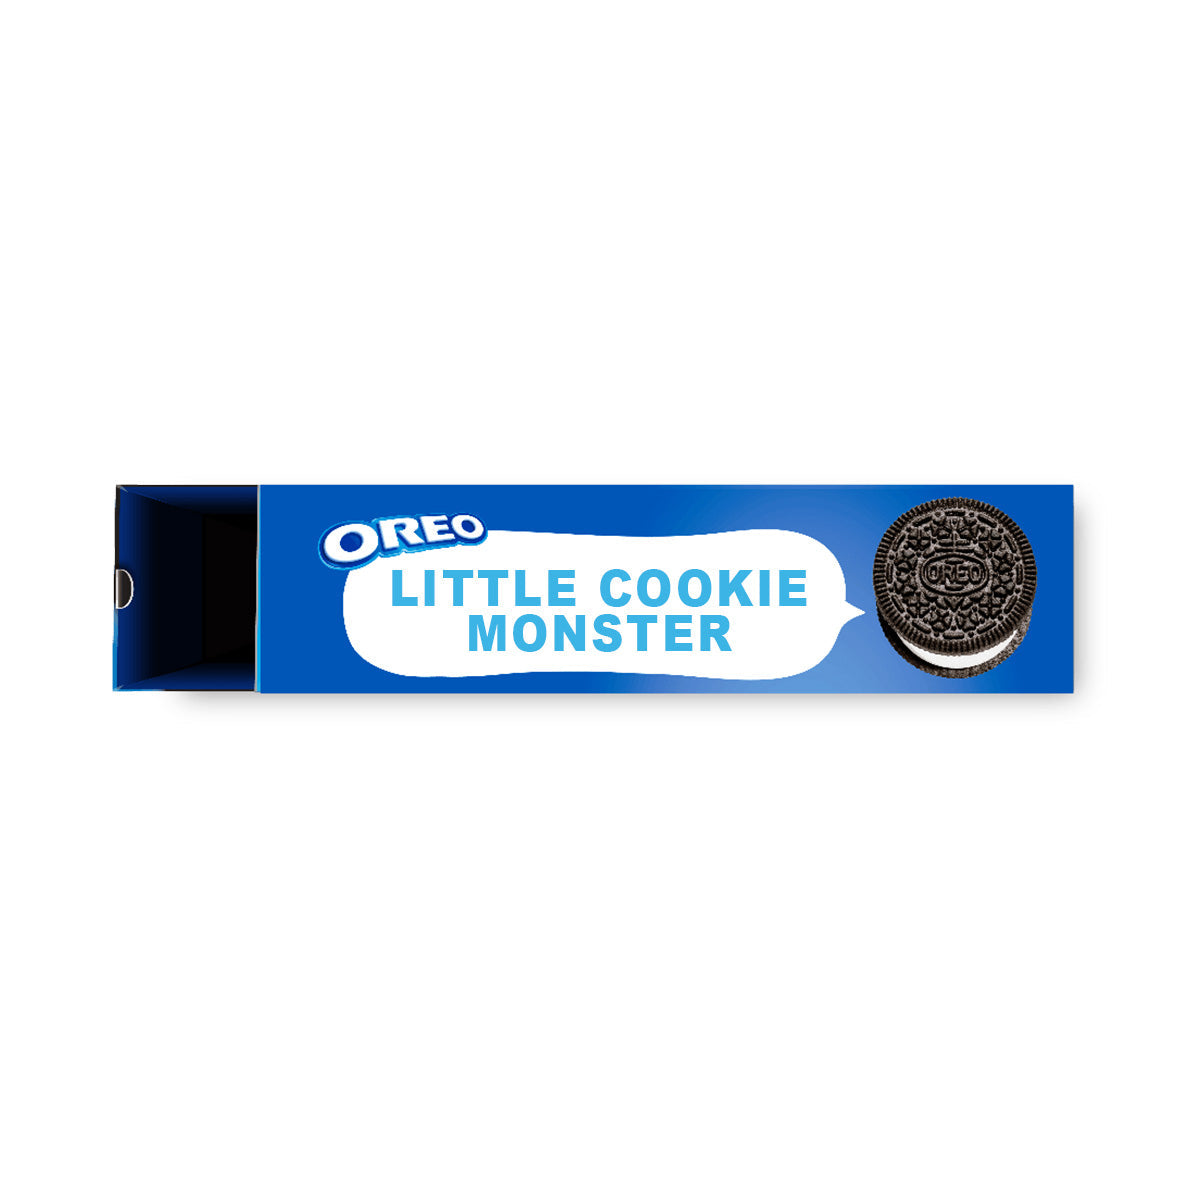 Personalised Box of Oreo's - Little Cookie Monster